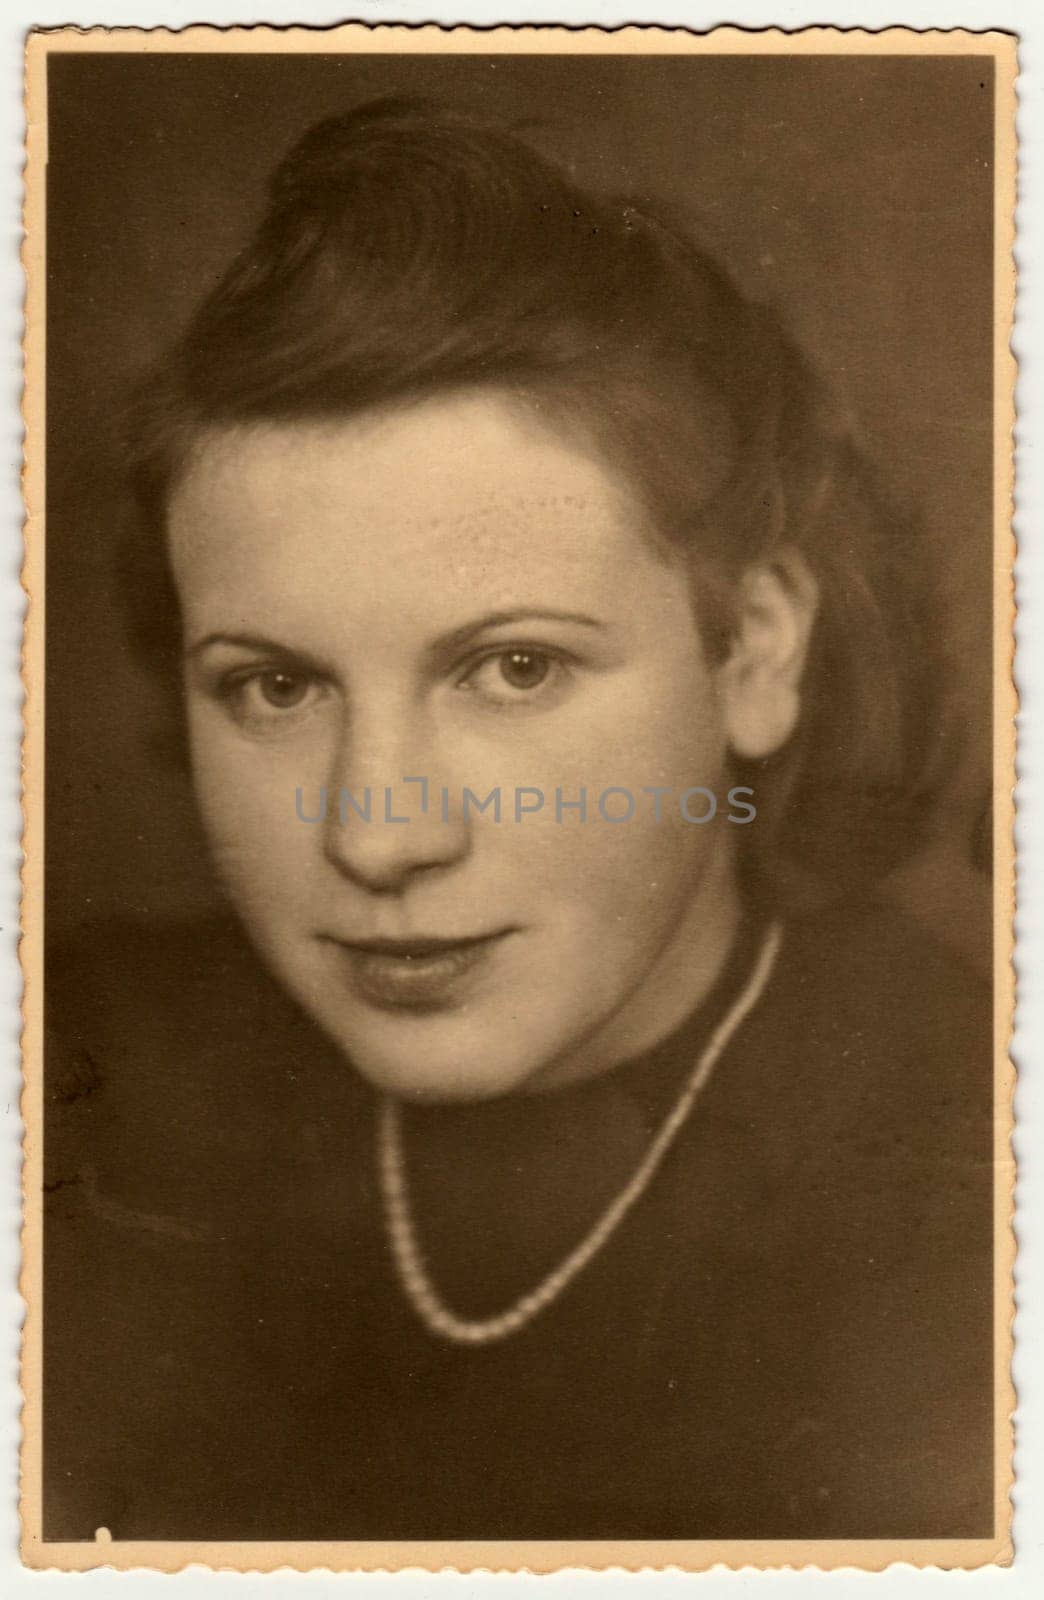 OBERAMMERGAU, GERMANY - CIRCA 1940s: Vintage photo shows the portrait of a young girl. Retro black and white studio photography.